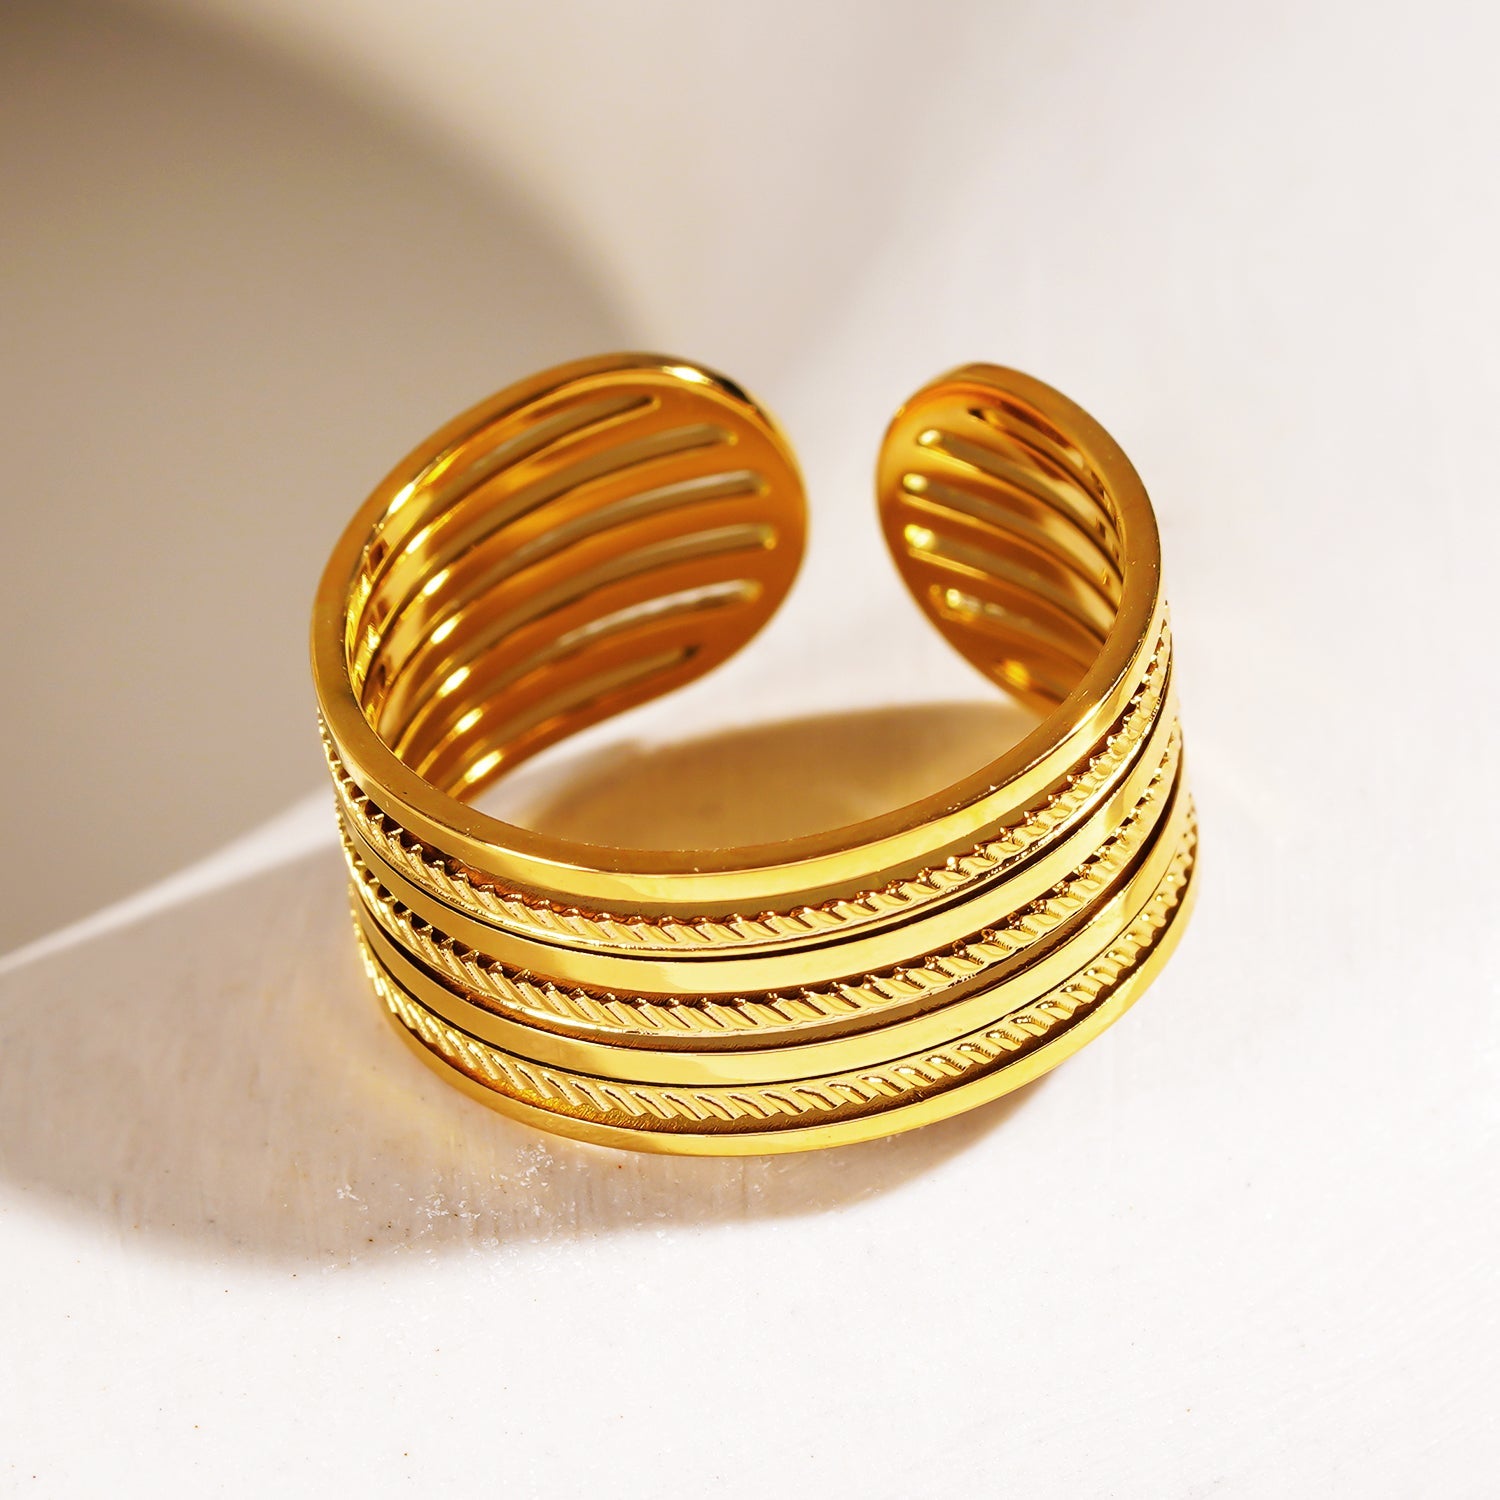 Style REYNA 2802: Multi Stacked Contrast Textured Contemporary Ring.